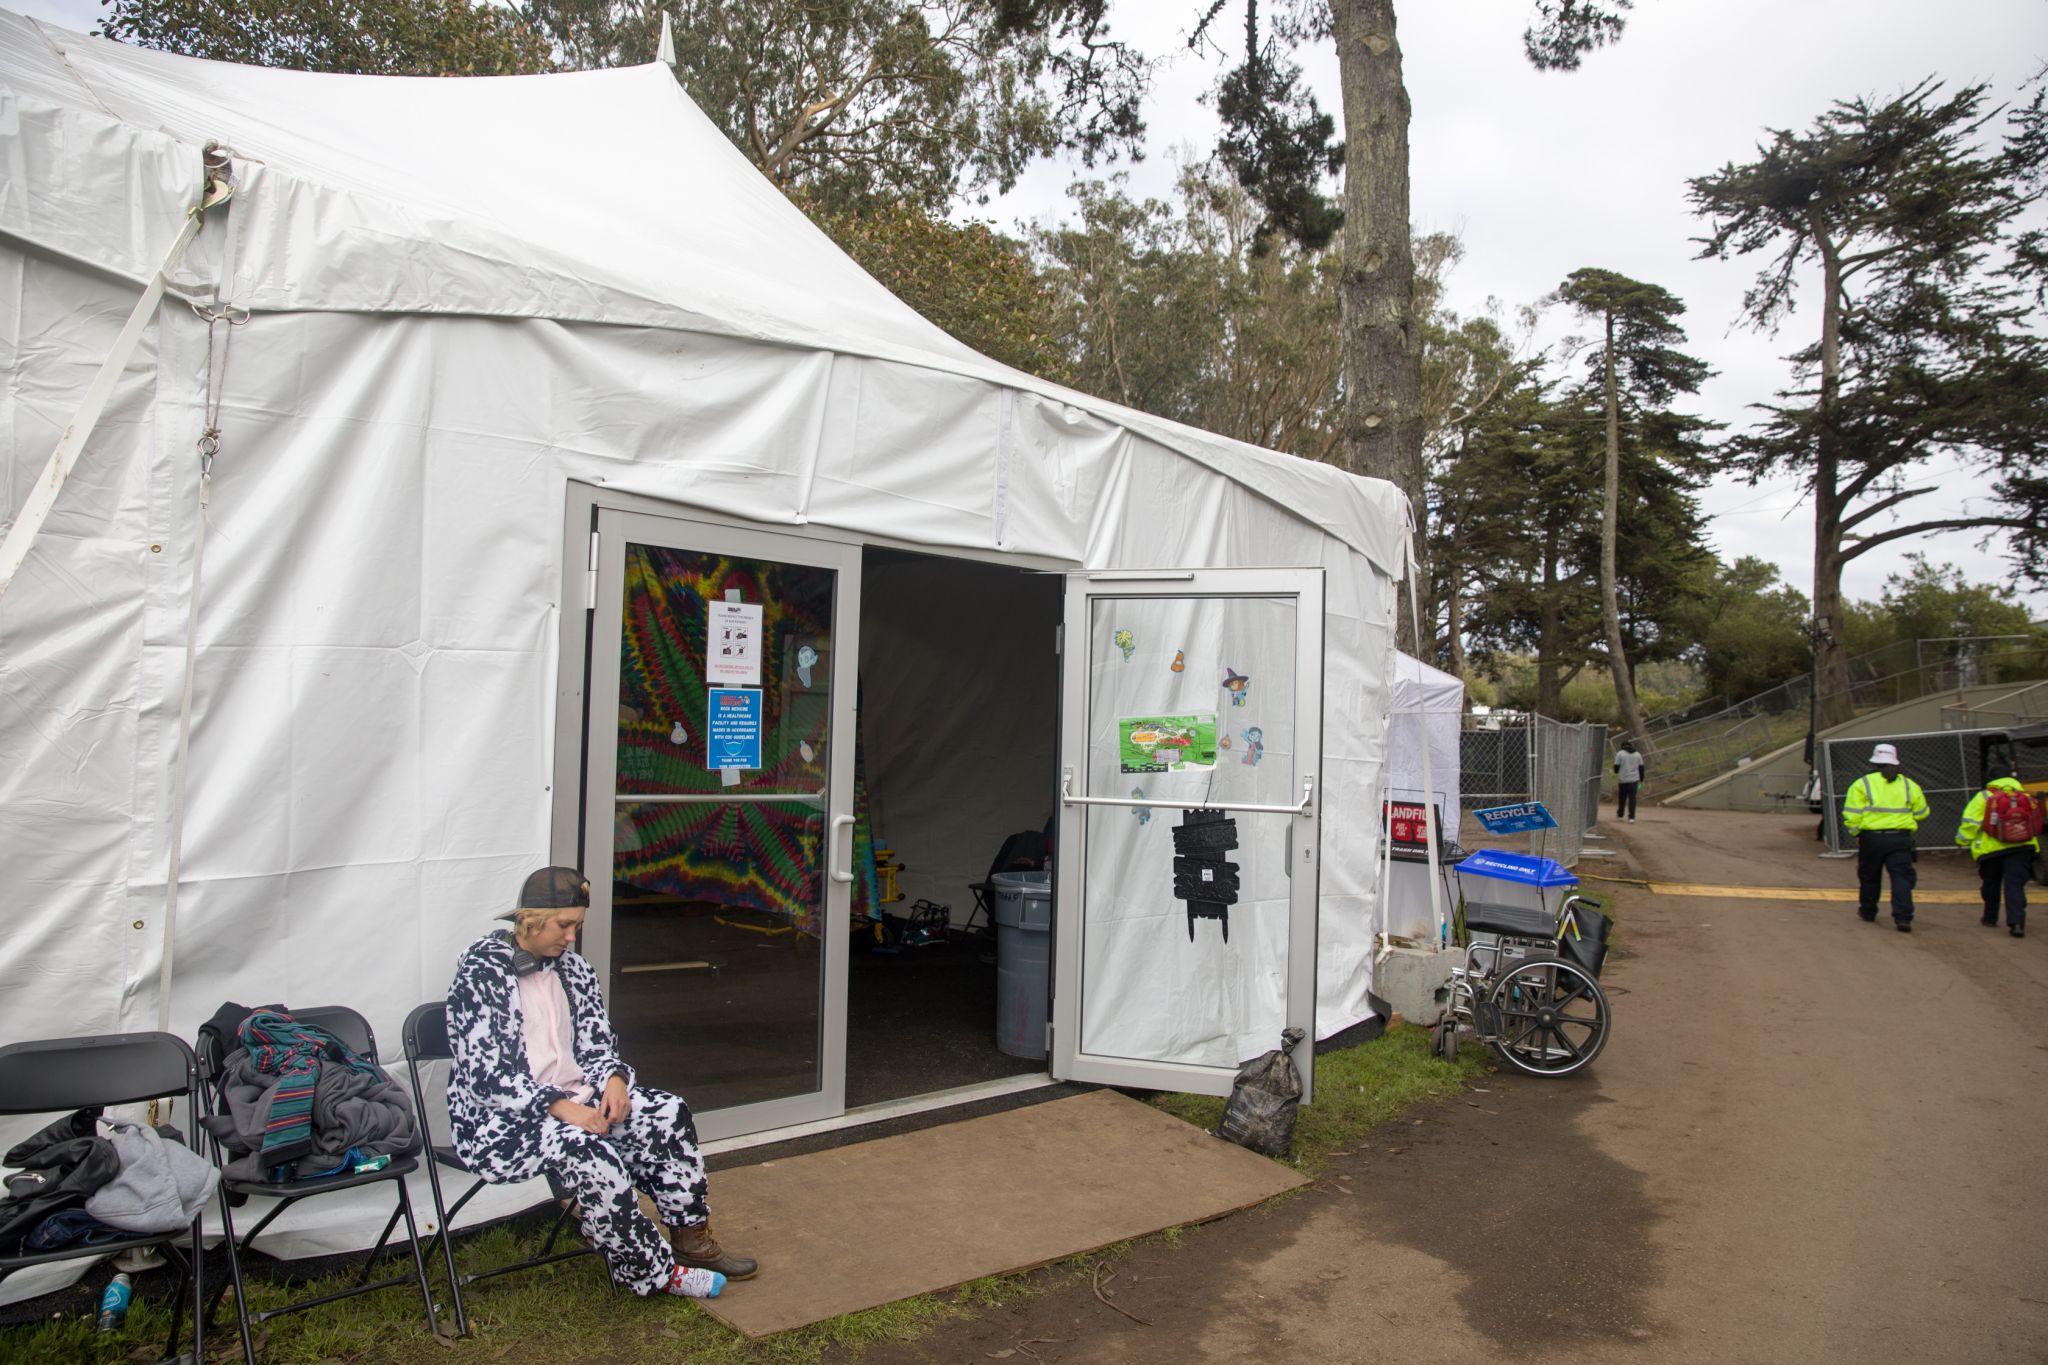 I ended up in the medical tent at Outside Lands. Here’s what happened.